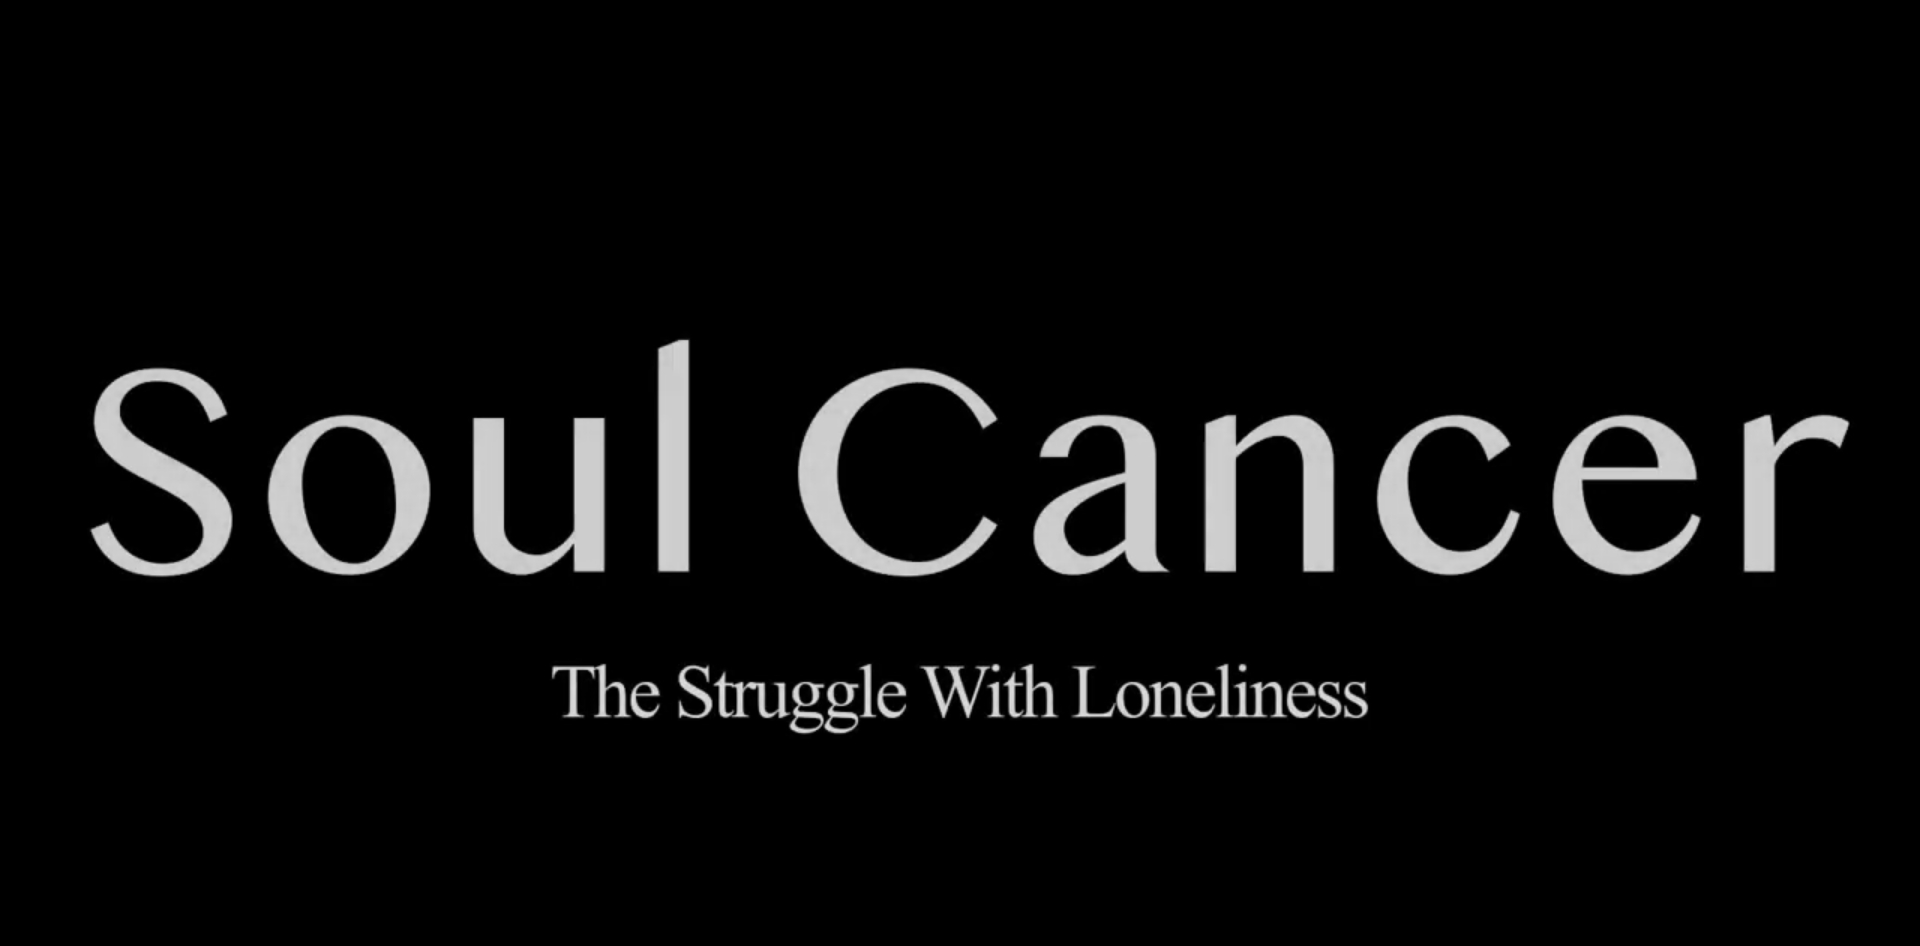 Soul Cancer. The effects of loneliness told through visuals.